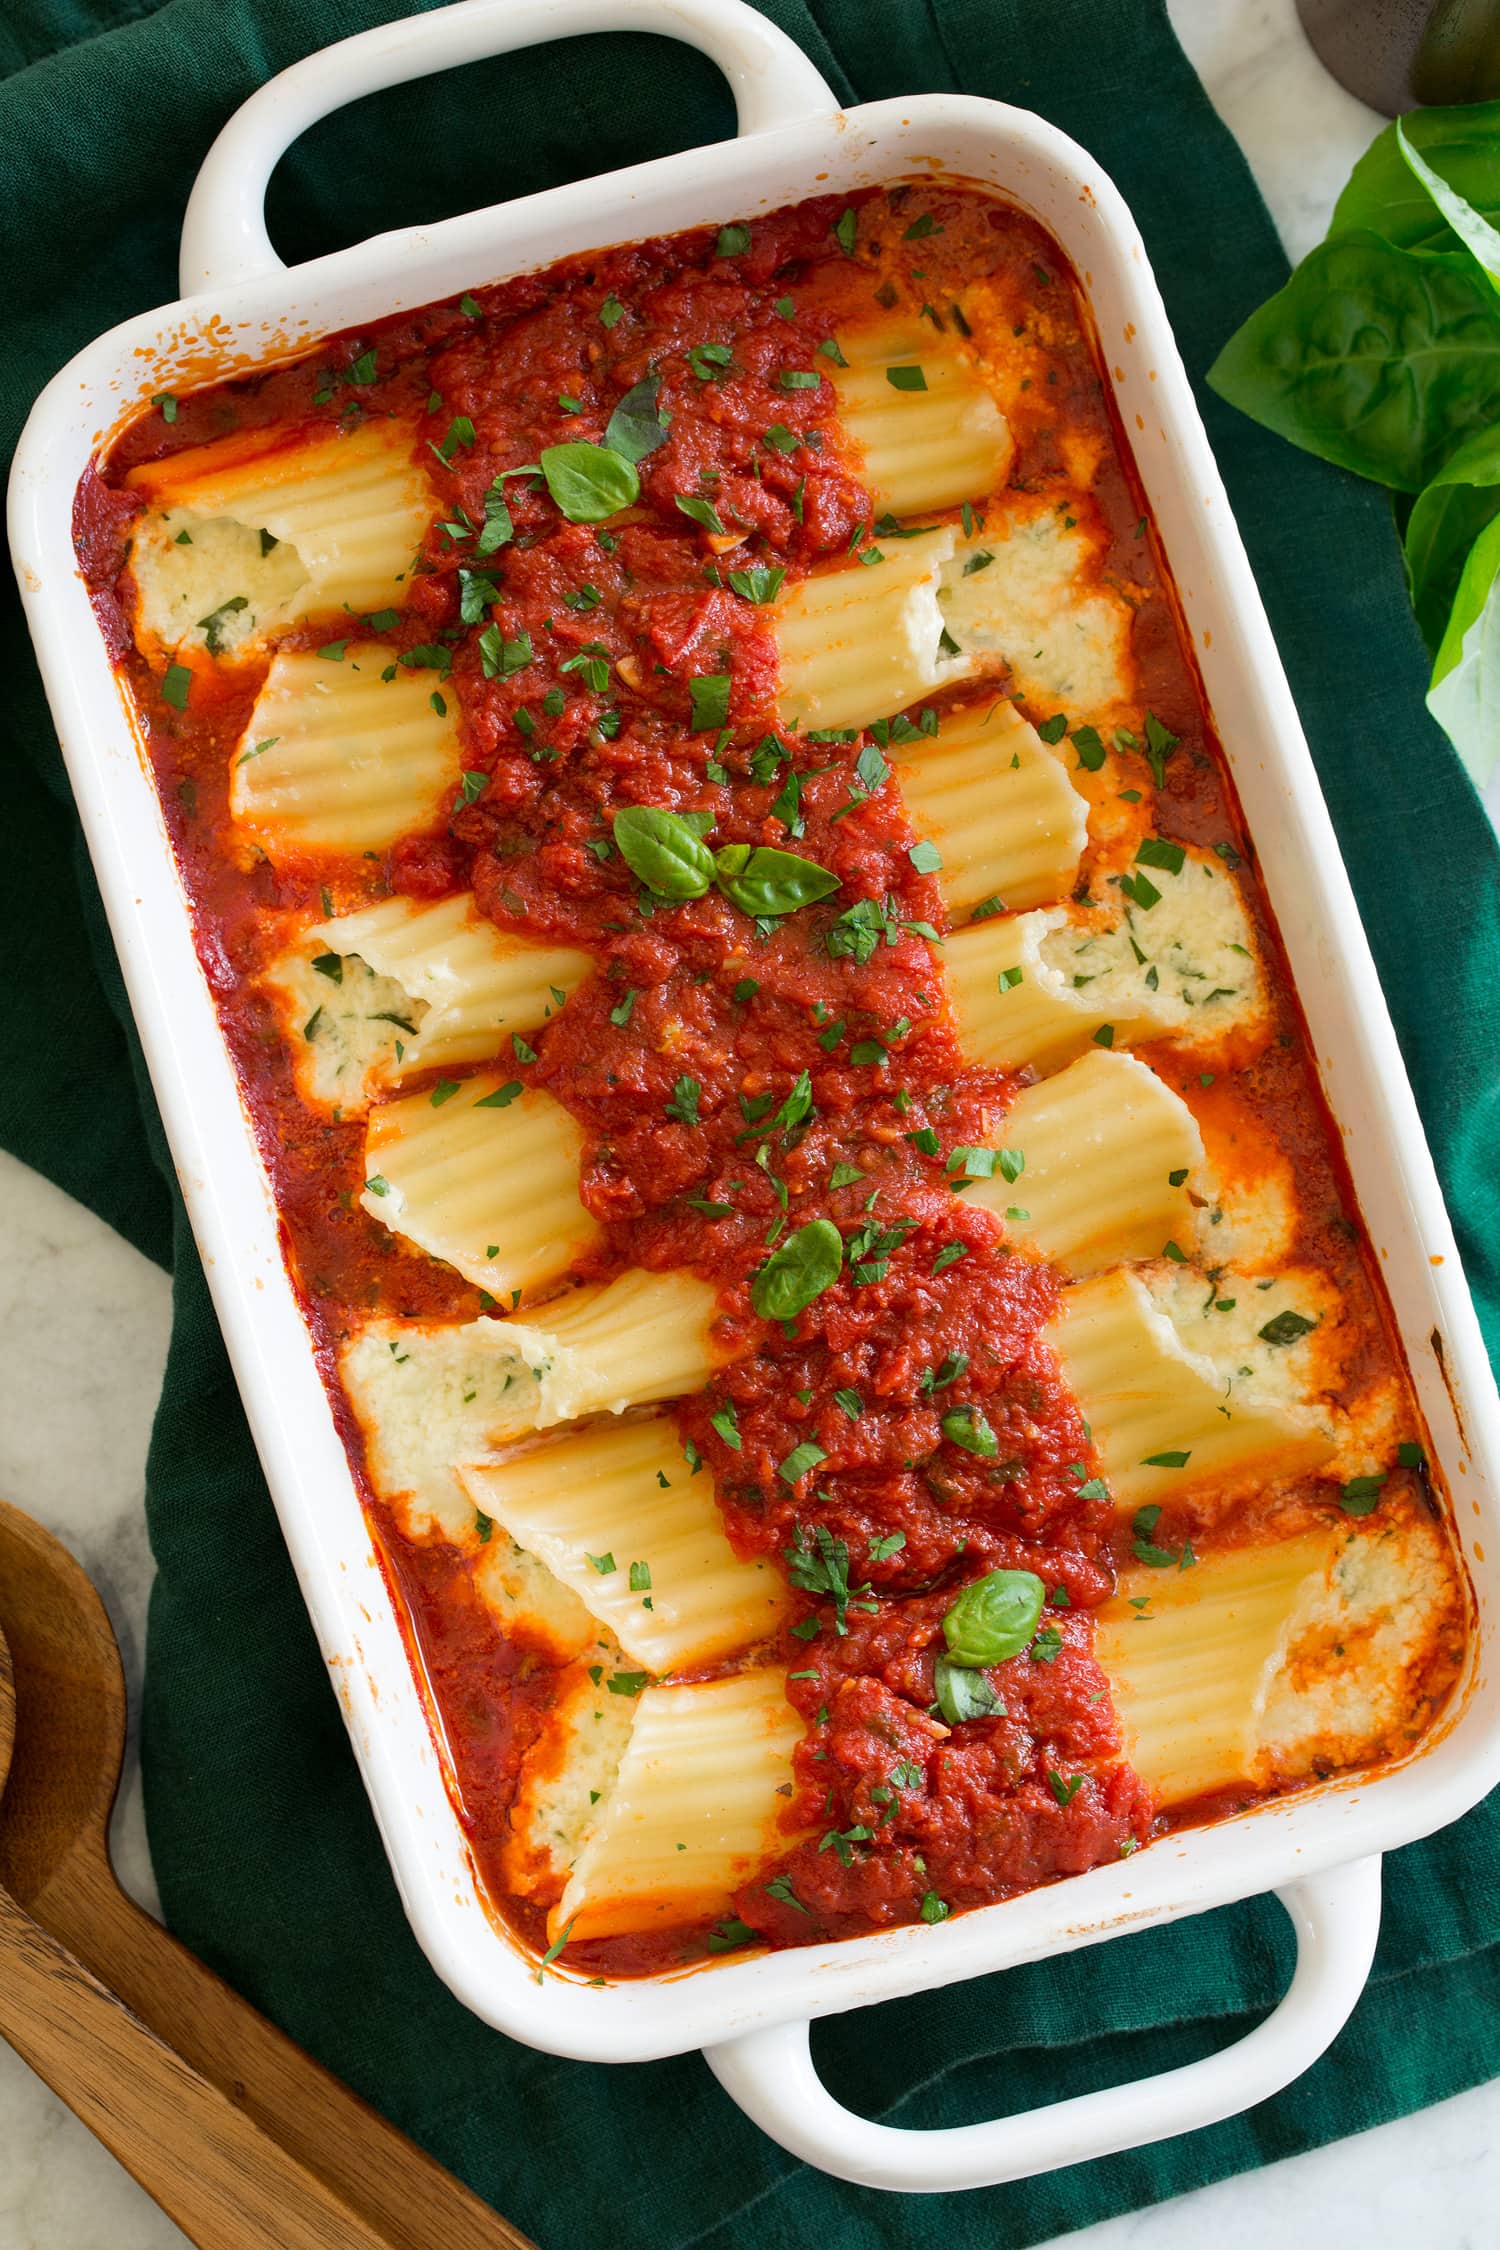 Manicotti shown from overhead in an 11 by 7 inch white rectangular baking dish.